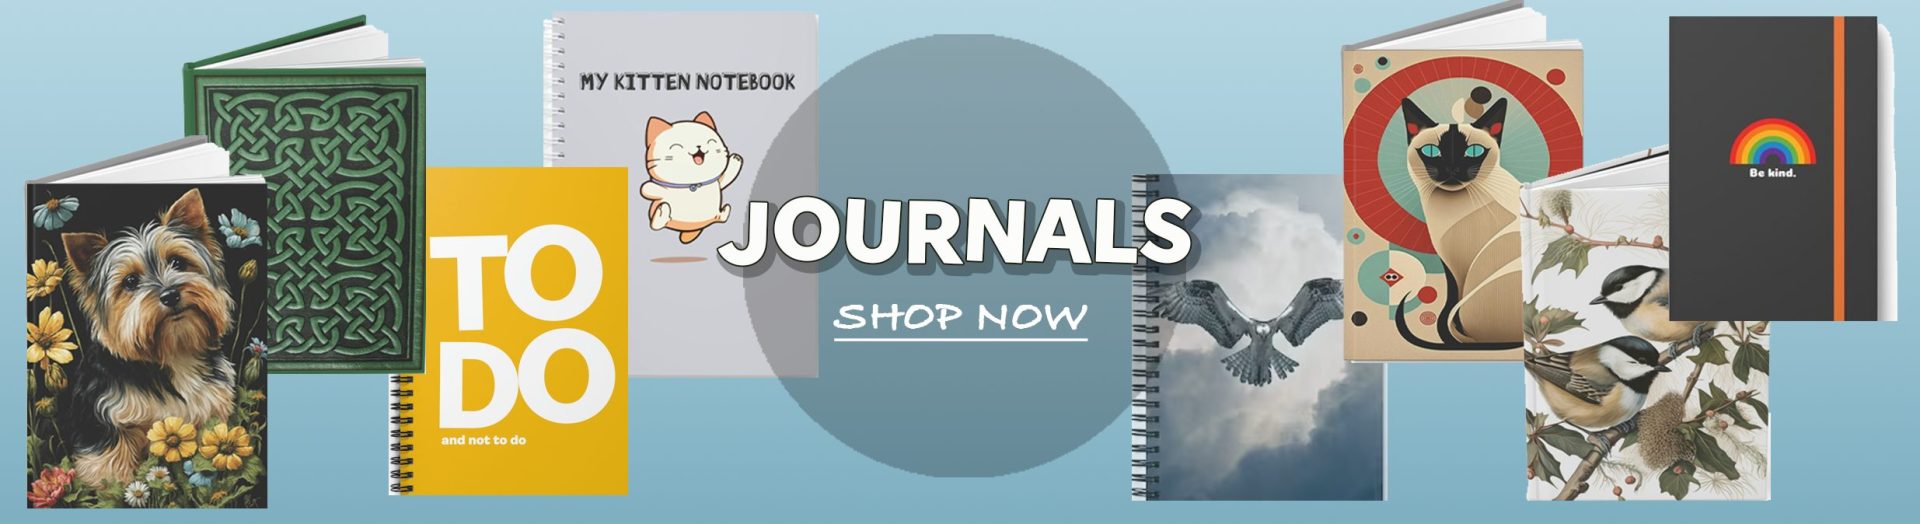 Category journals - Mowbi Brand Gifts